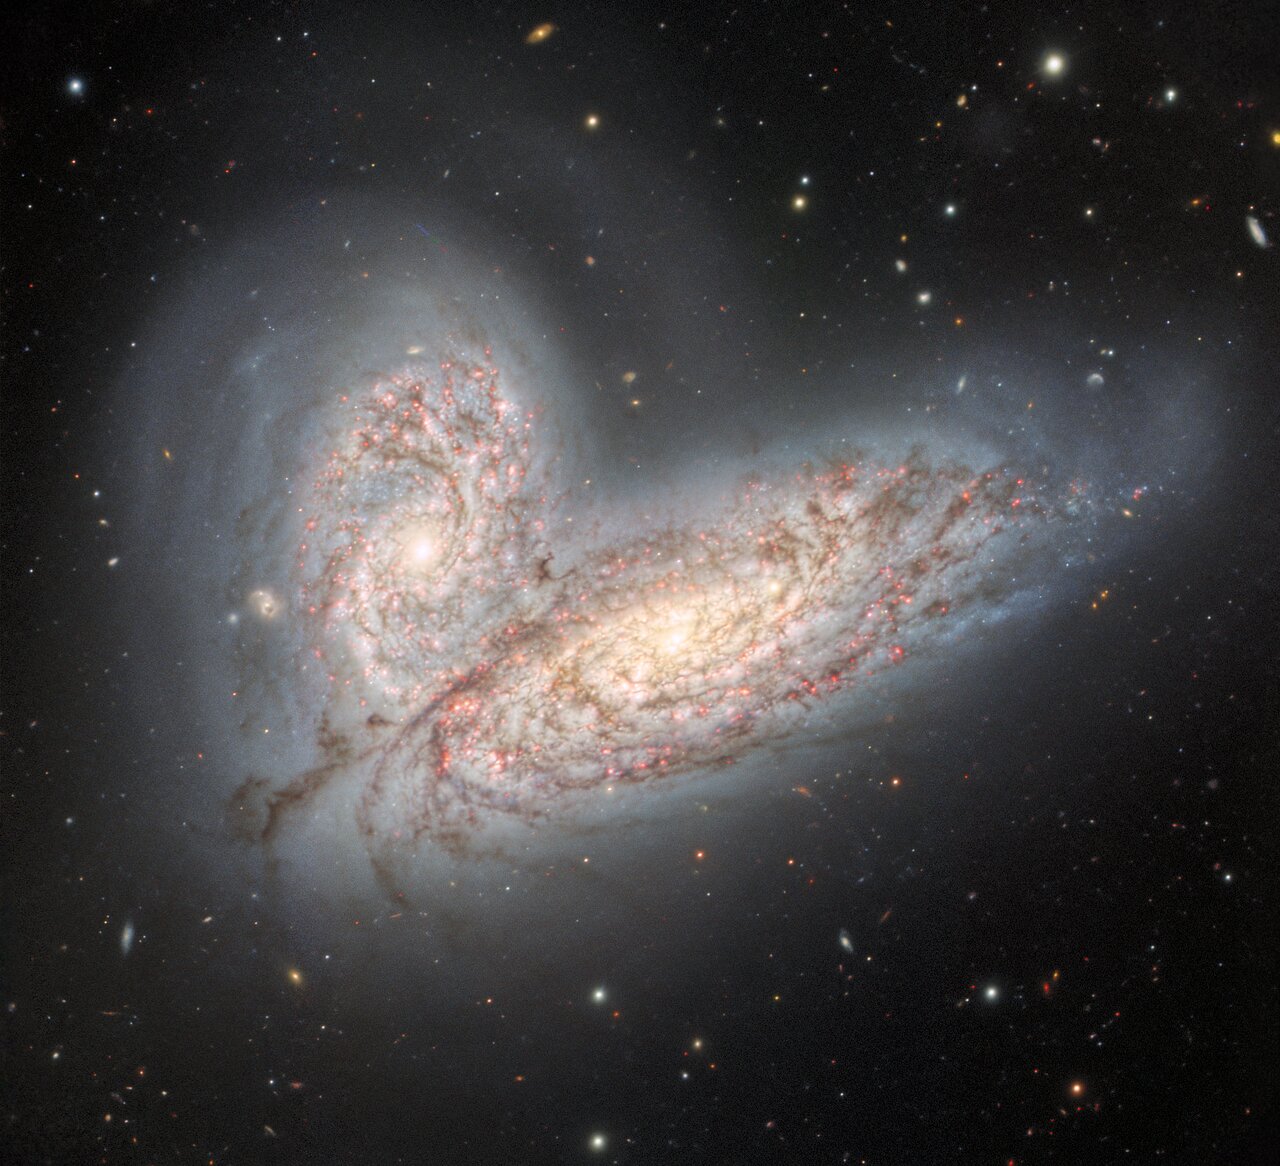 Two galaxies collide in image from Gemini North telescope